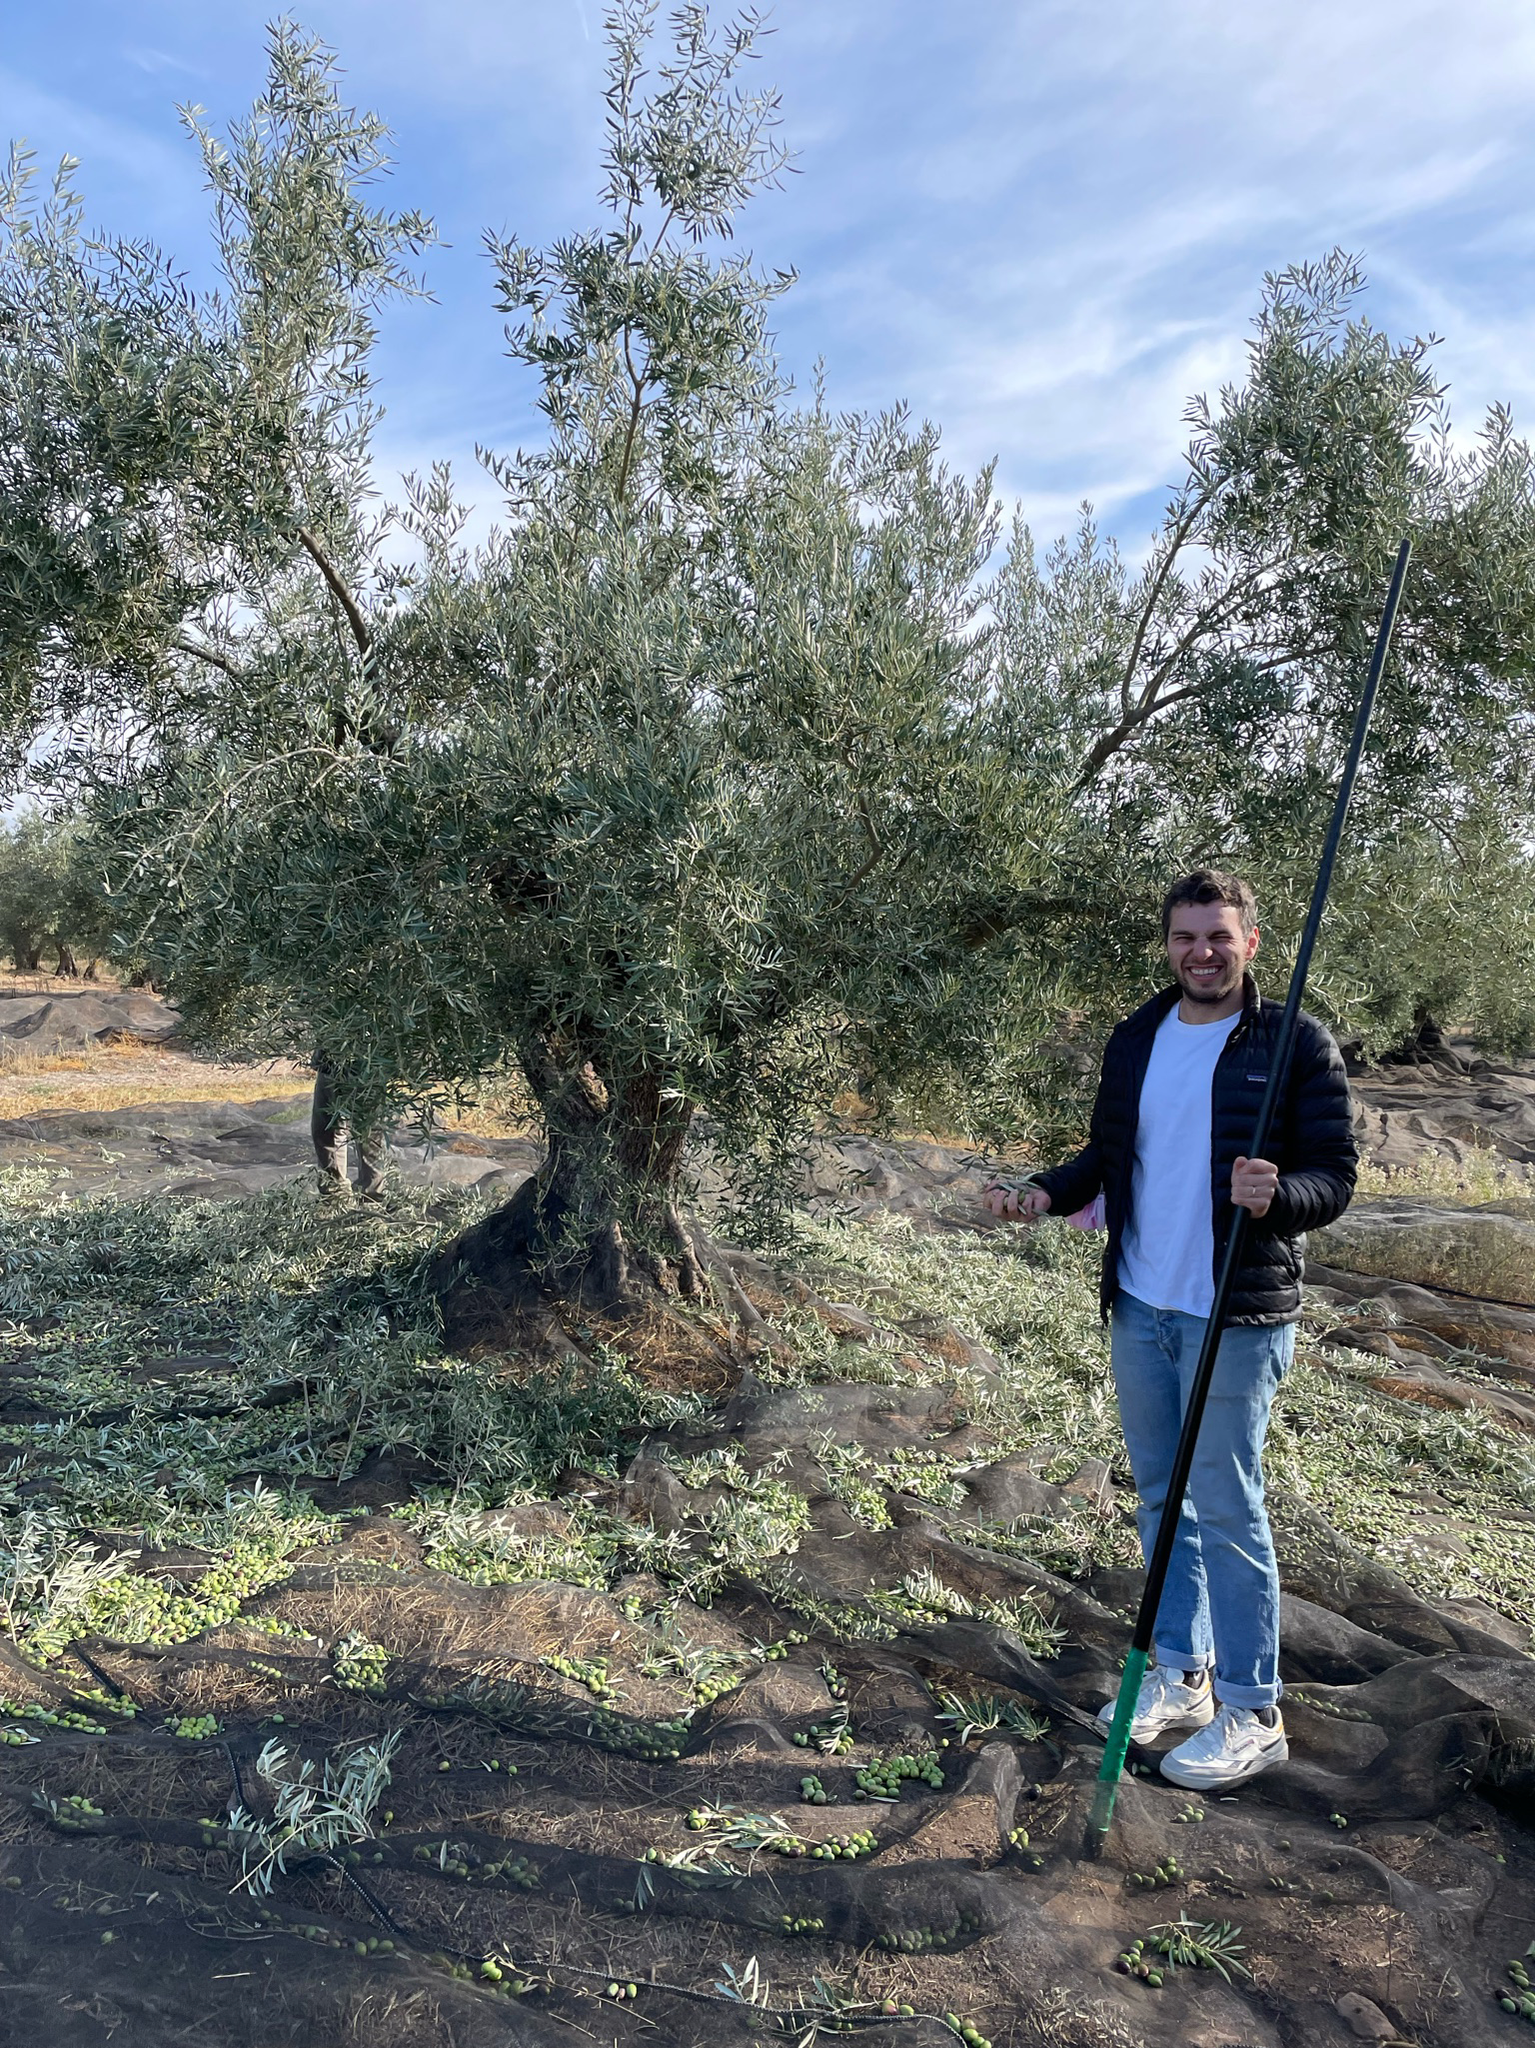 Man standing next to olive tree